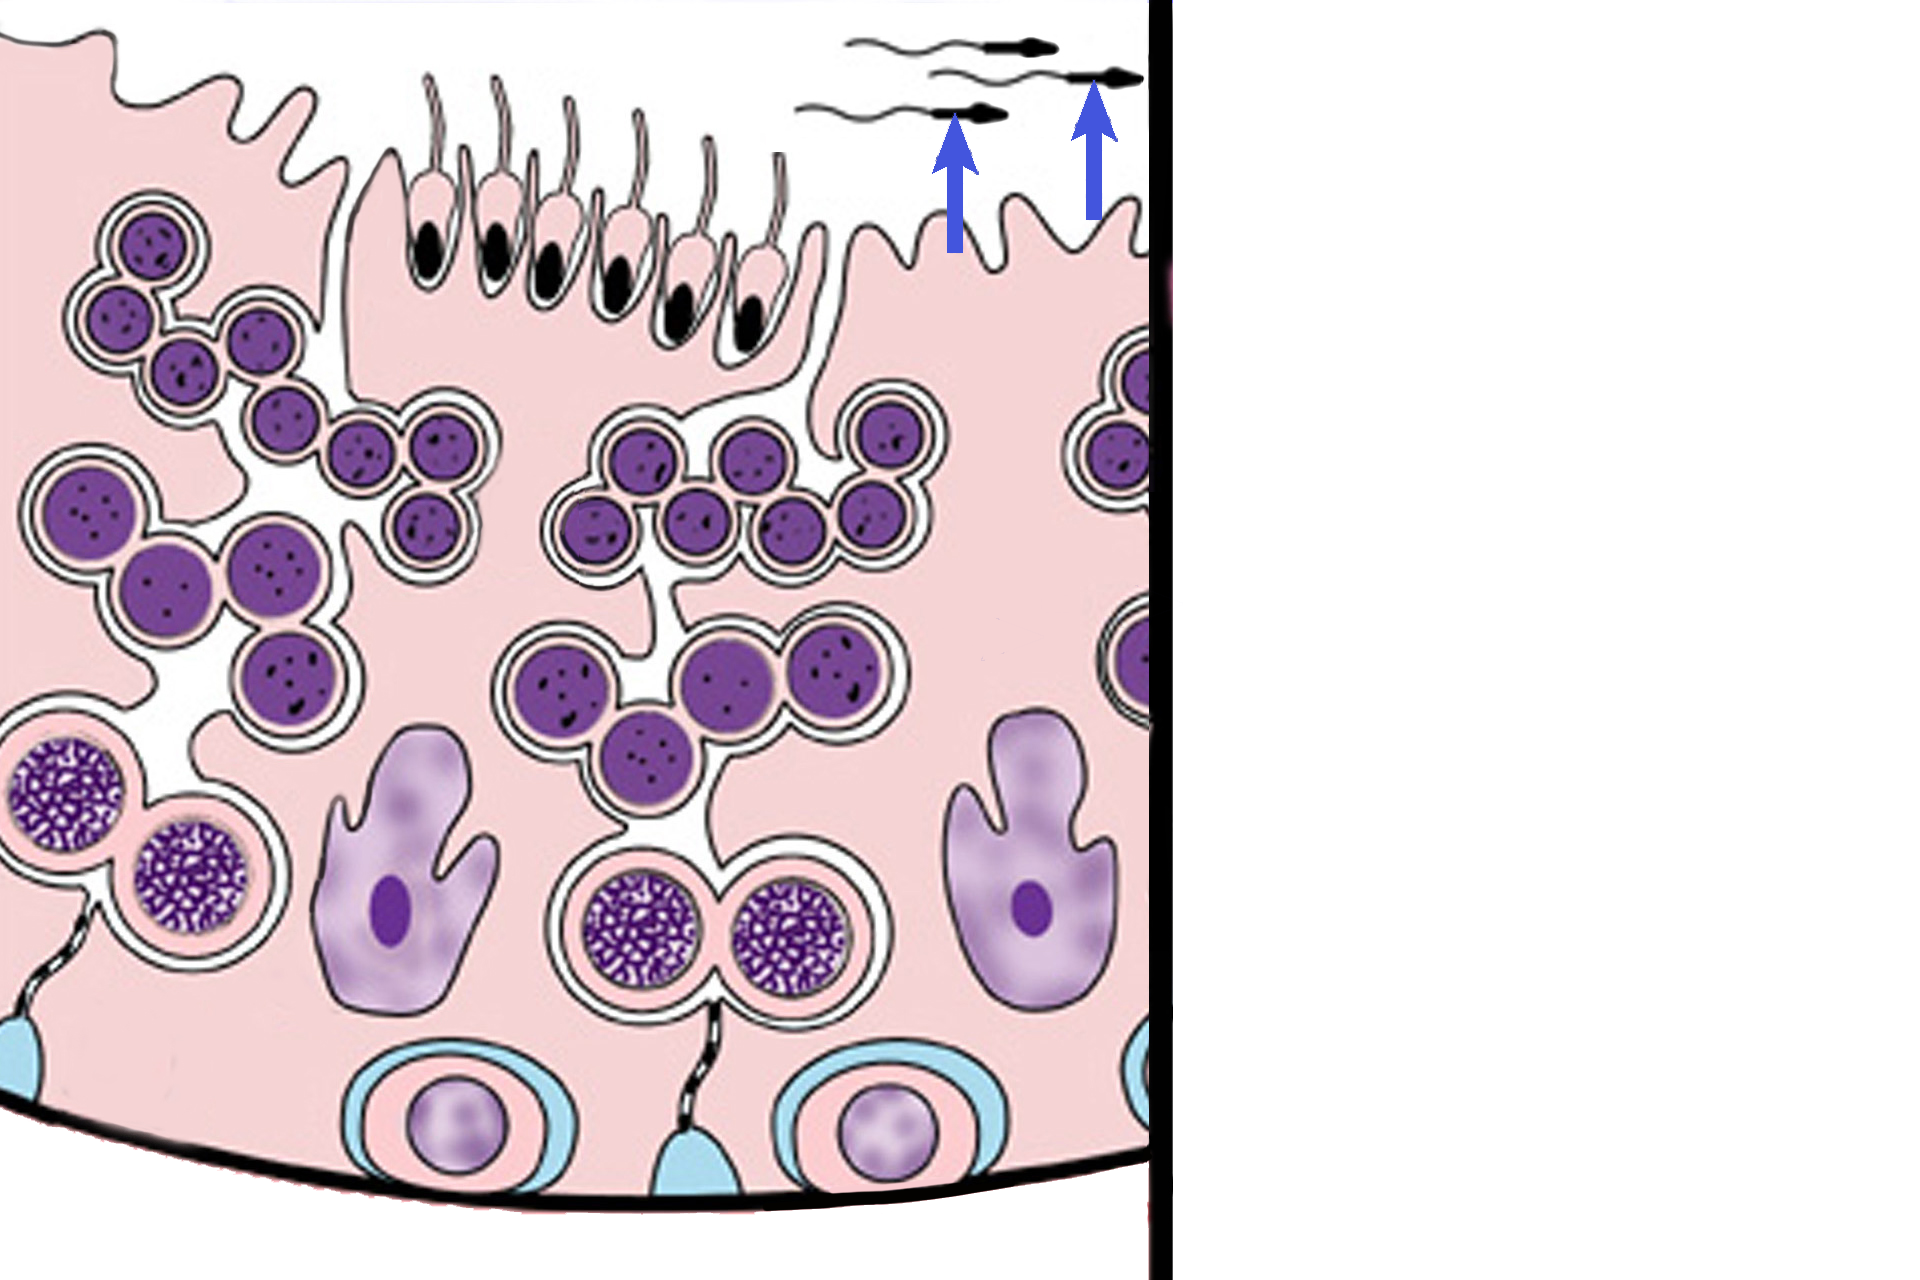  - Spermatozoa > <p>Spermatozoa are haploid cells formed by the cytodifferentiation of spermatids. Spermatozoa are released from the seminiferous epithelium (germinal epithelium) by the Sertoli cells and lie free in the lumen of the convoluted portions of the seminiferous tubules.</p>
